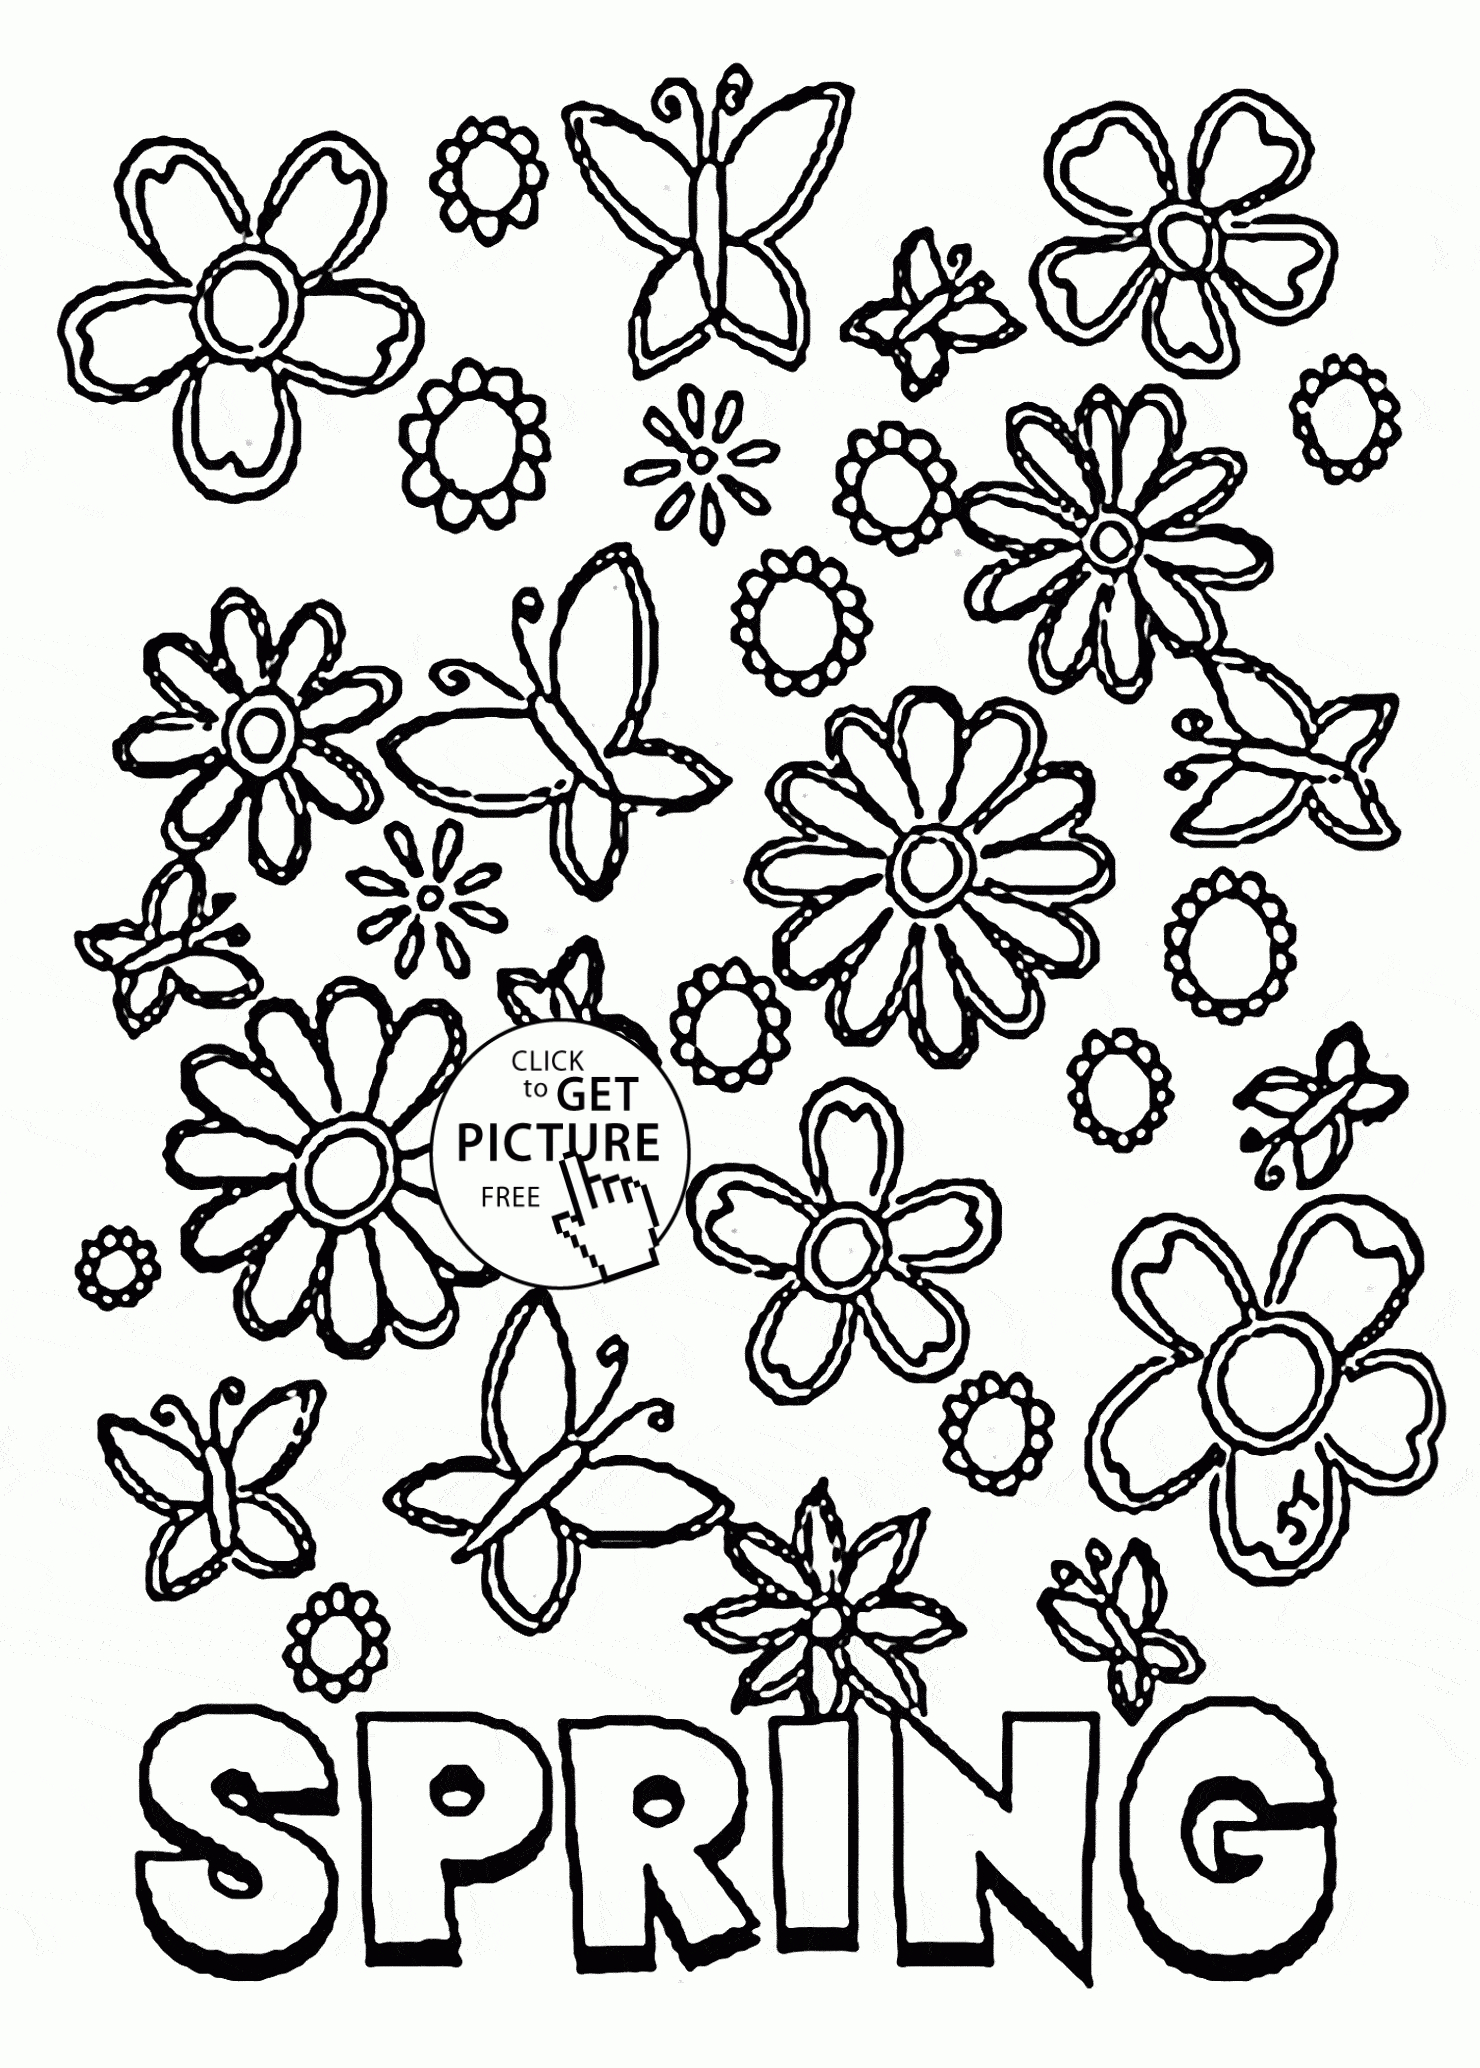 Coloring Pages : Springring Pages Free Printable Outstanding Picture - Free Printable Spring Coloring Pages For Adults